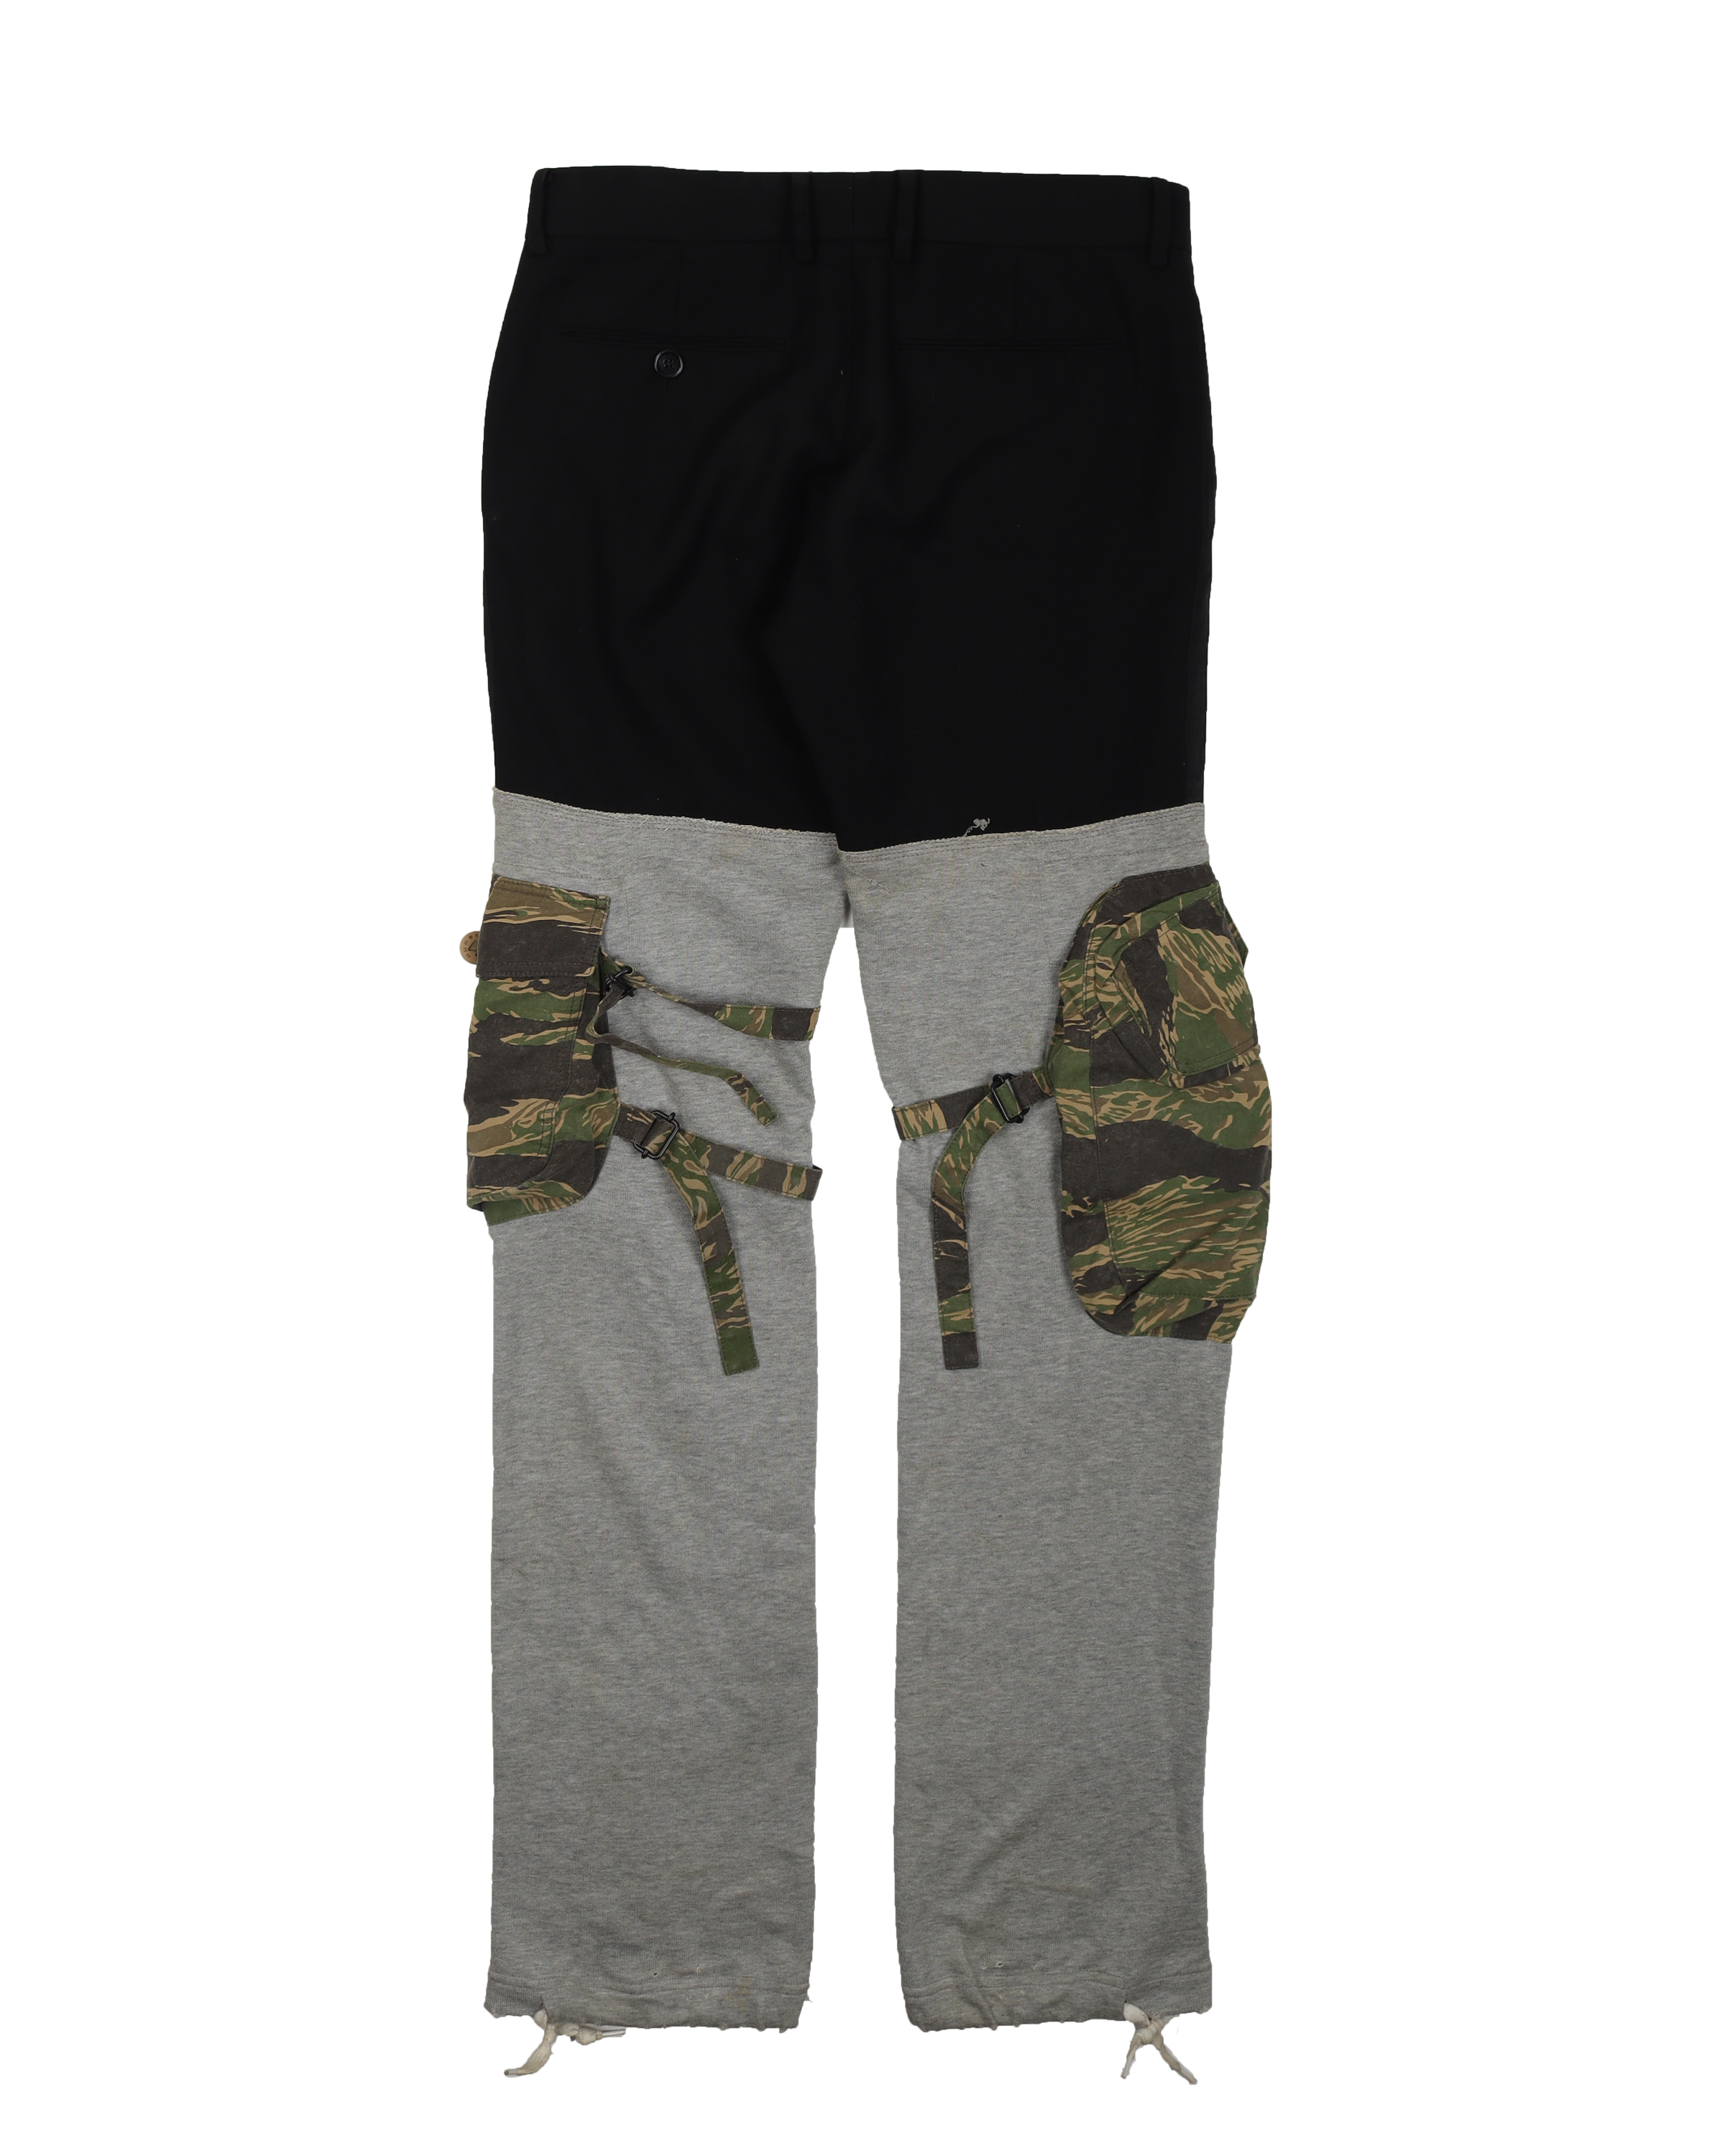 AW05 "The High Streets" Hybrid Cargo Pants